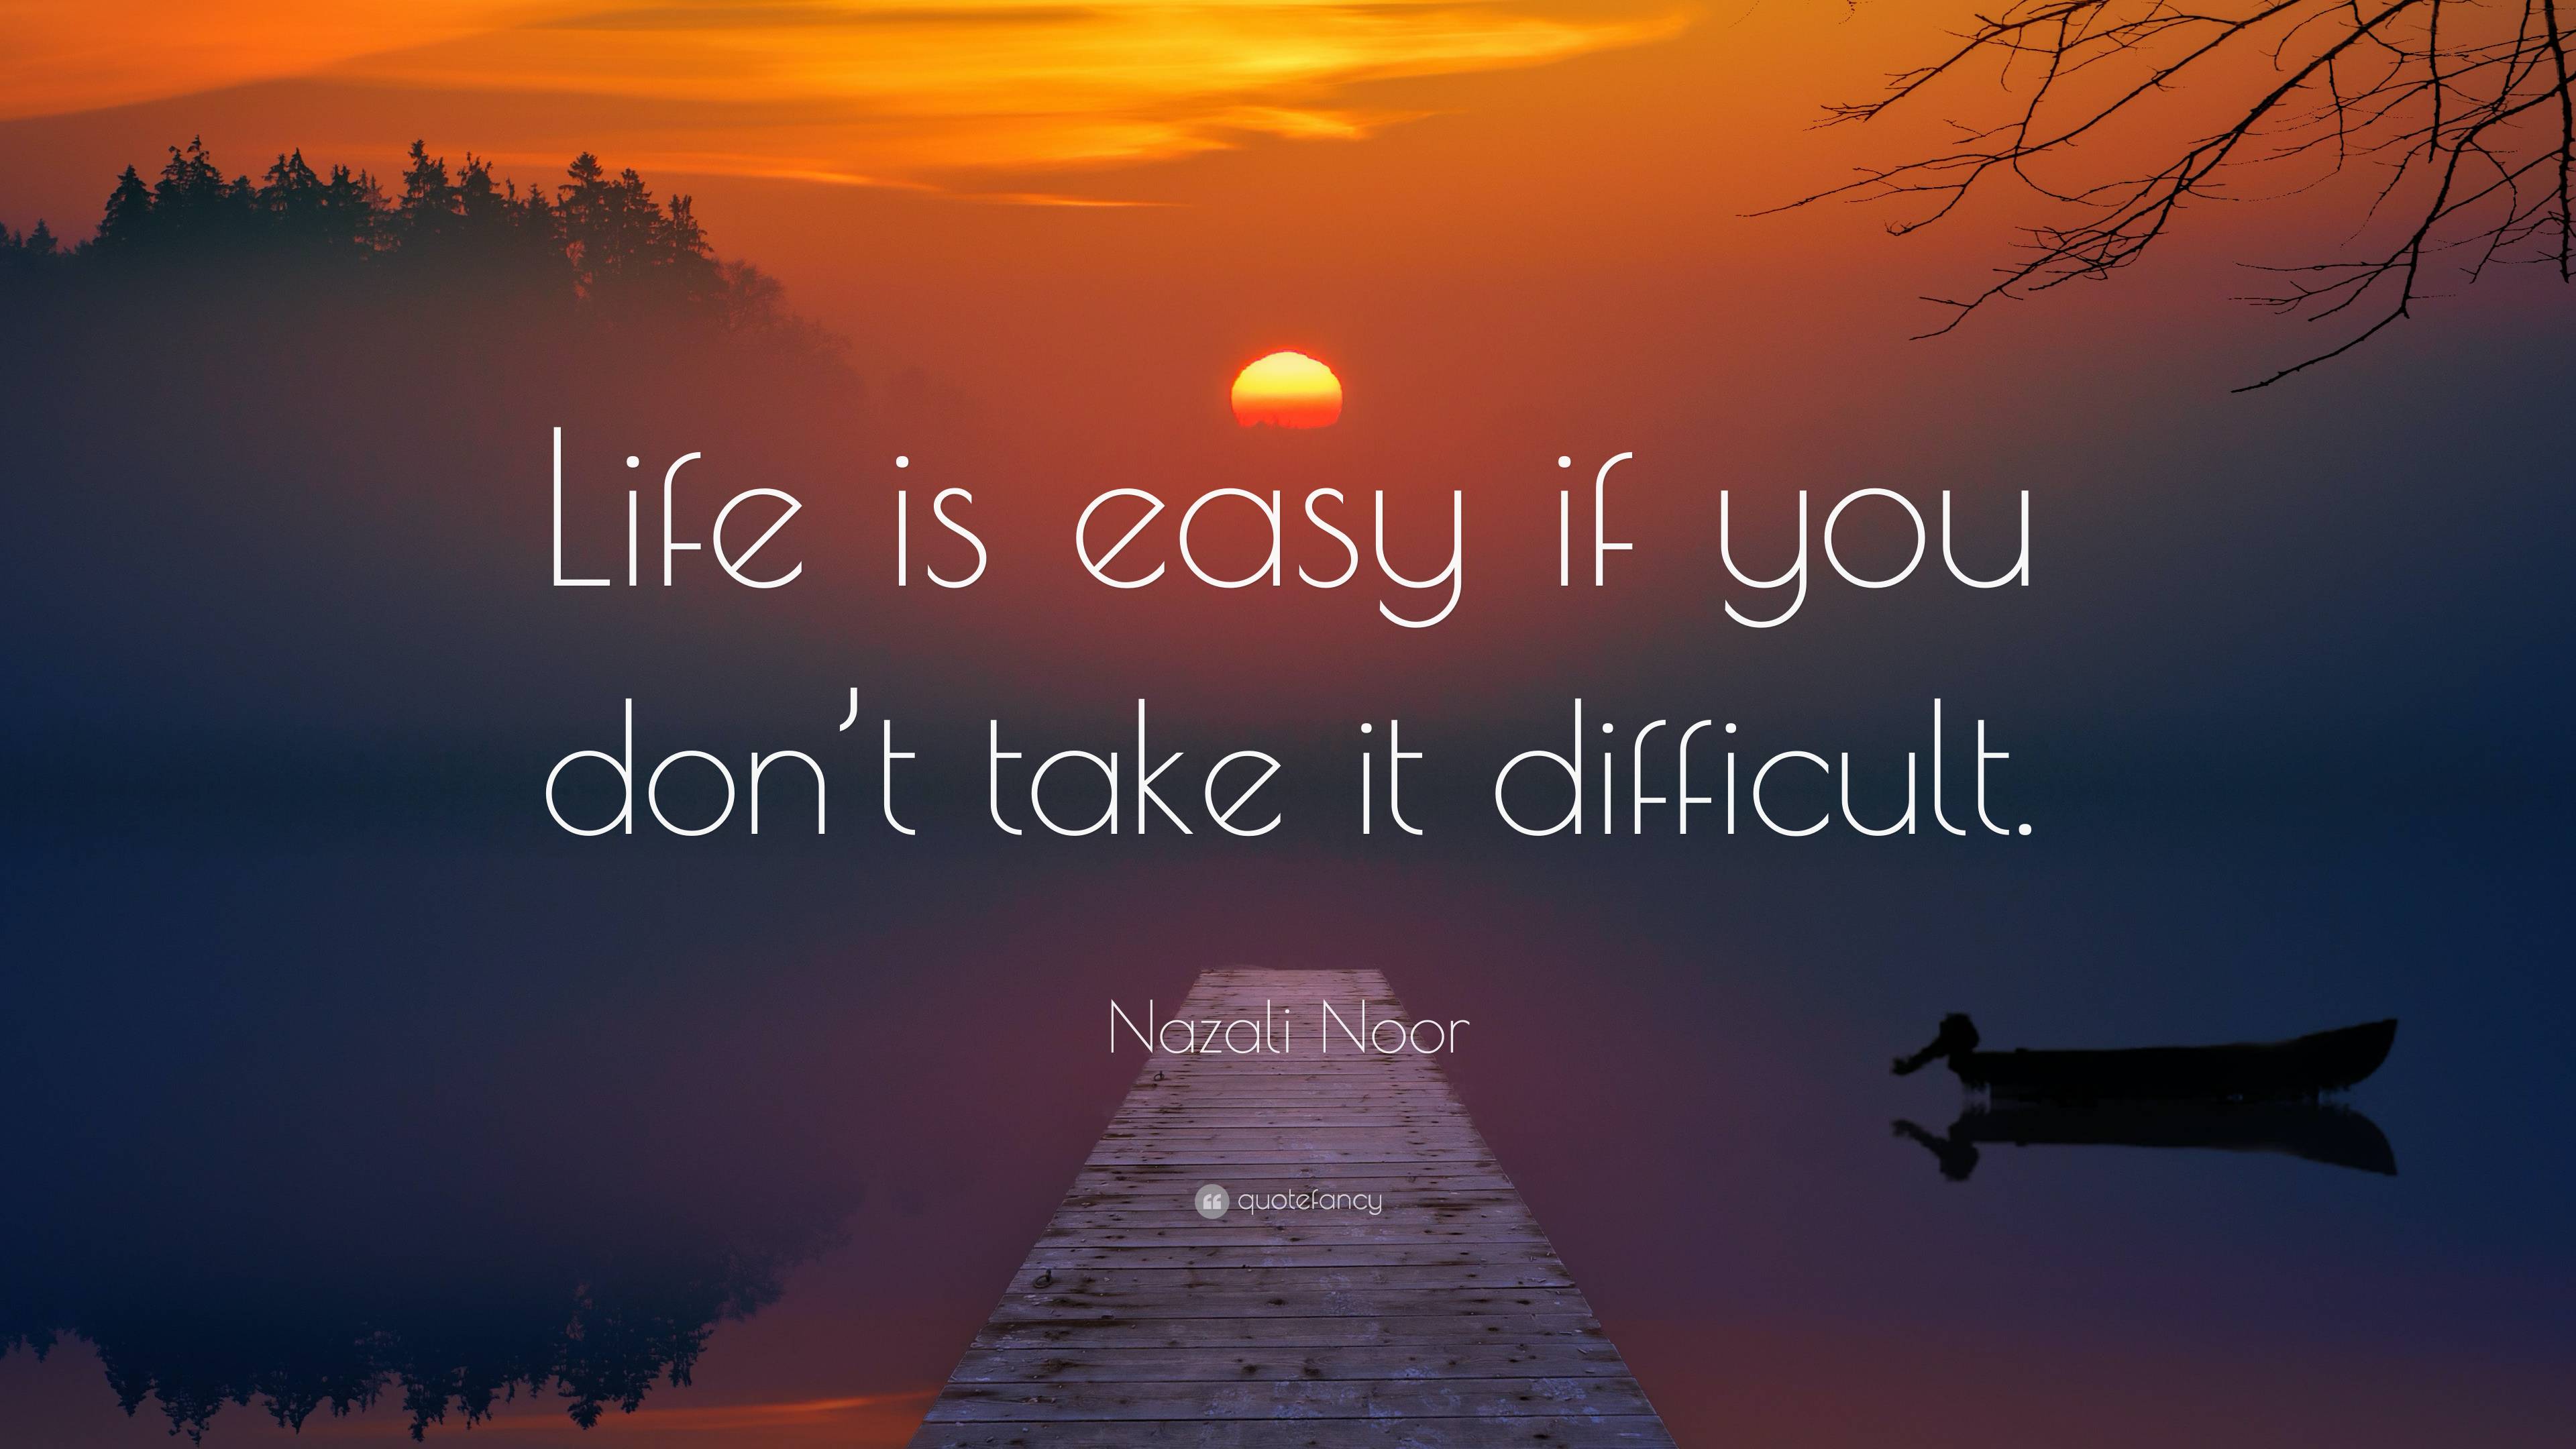 Nazali Noor Quote: “Life is easy if you don’t take it difficult.”